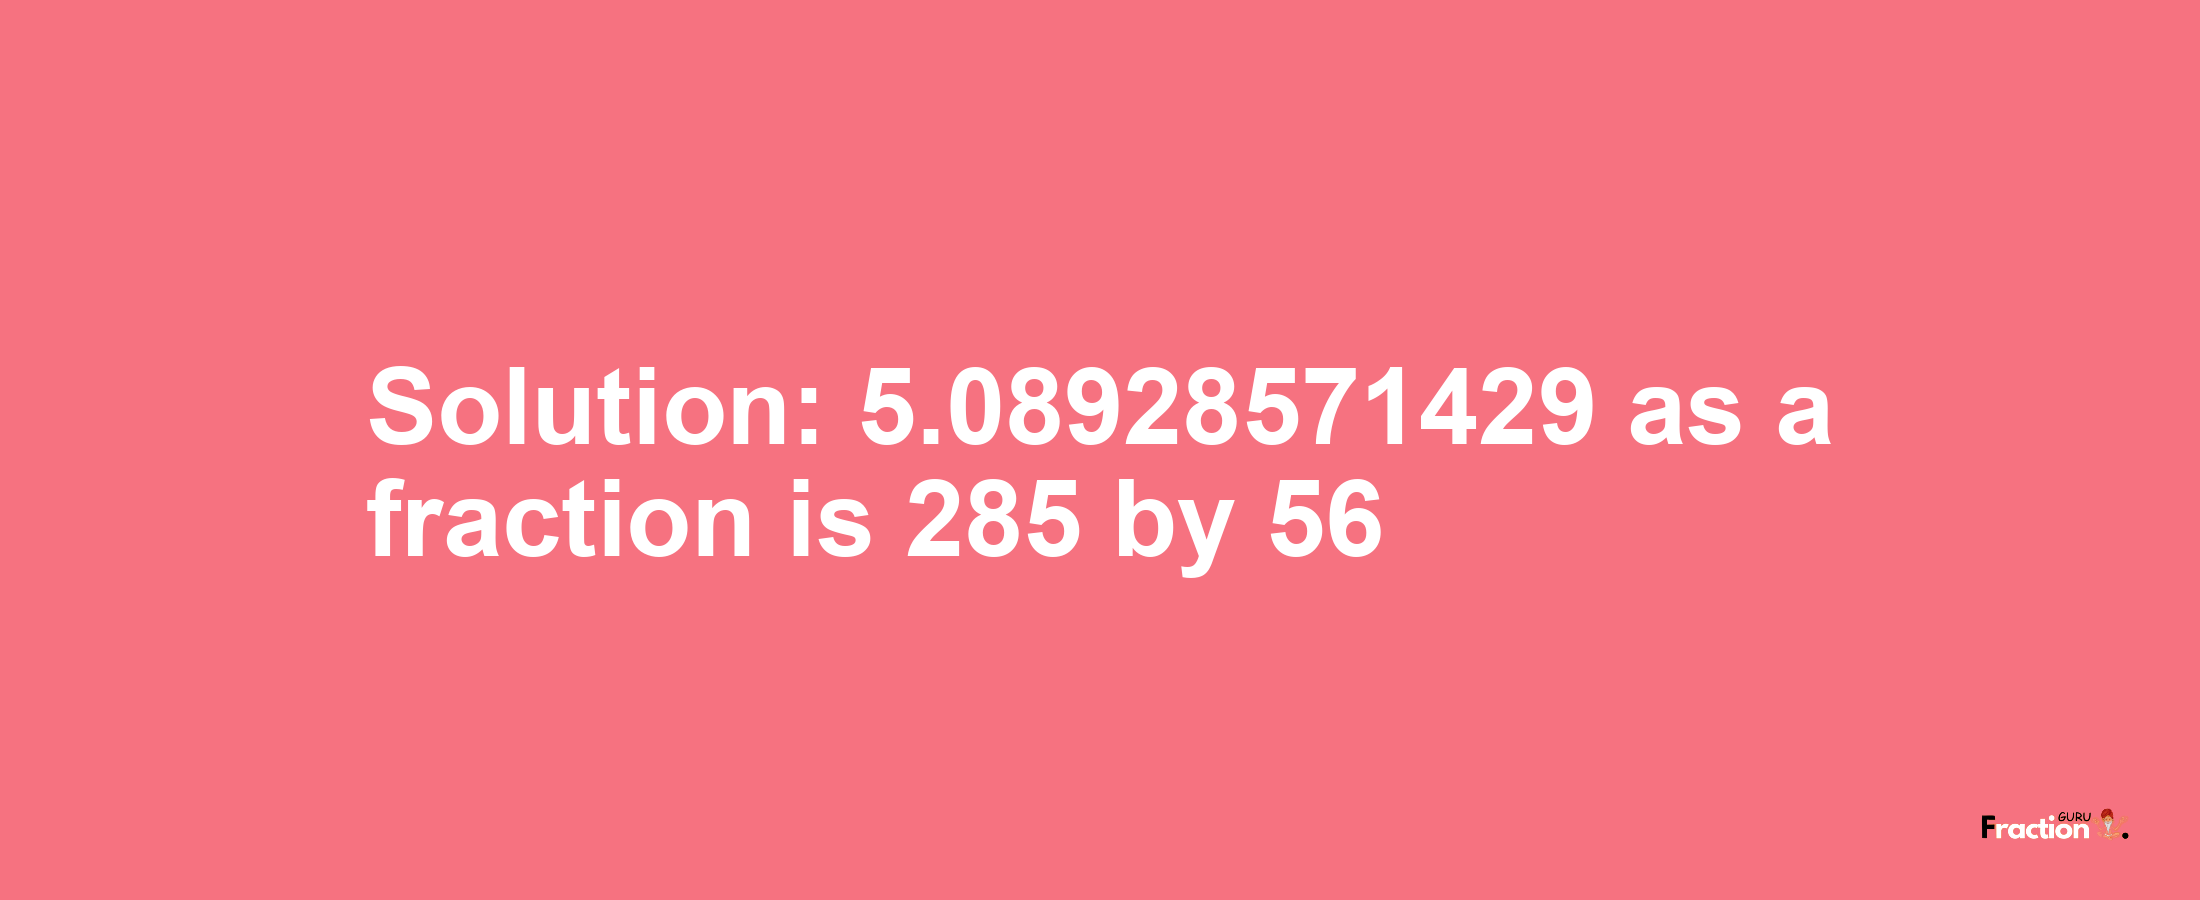 Solution:5.08928571429 as a fraction is 285/56